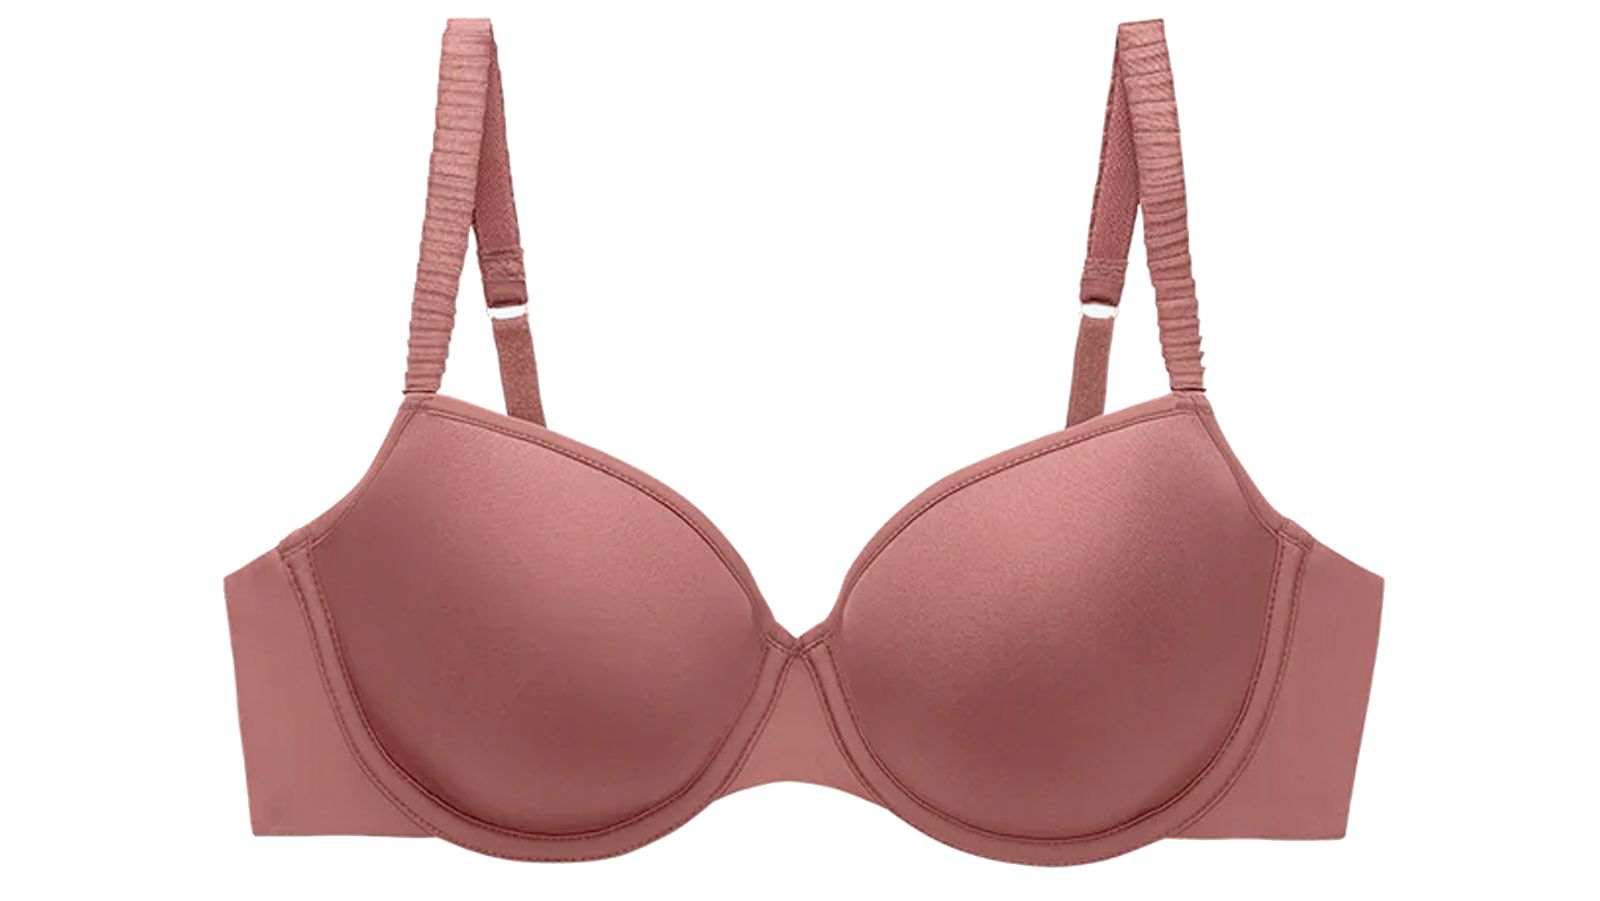 ThirdLove - The 24/7 Classic Contour Plunge Bra takes outfit versatility to  the max.